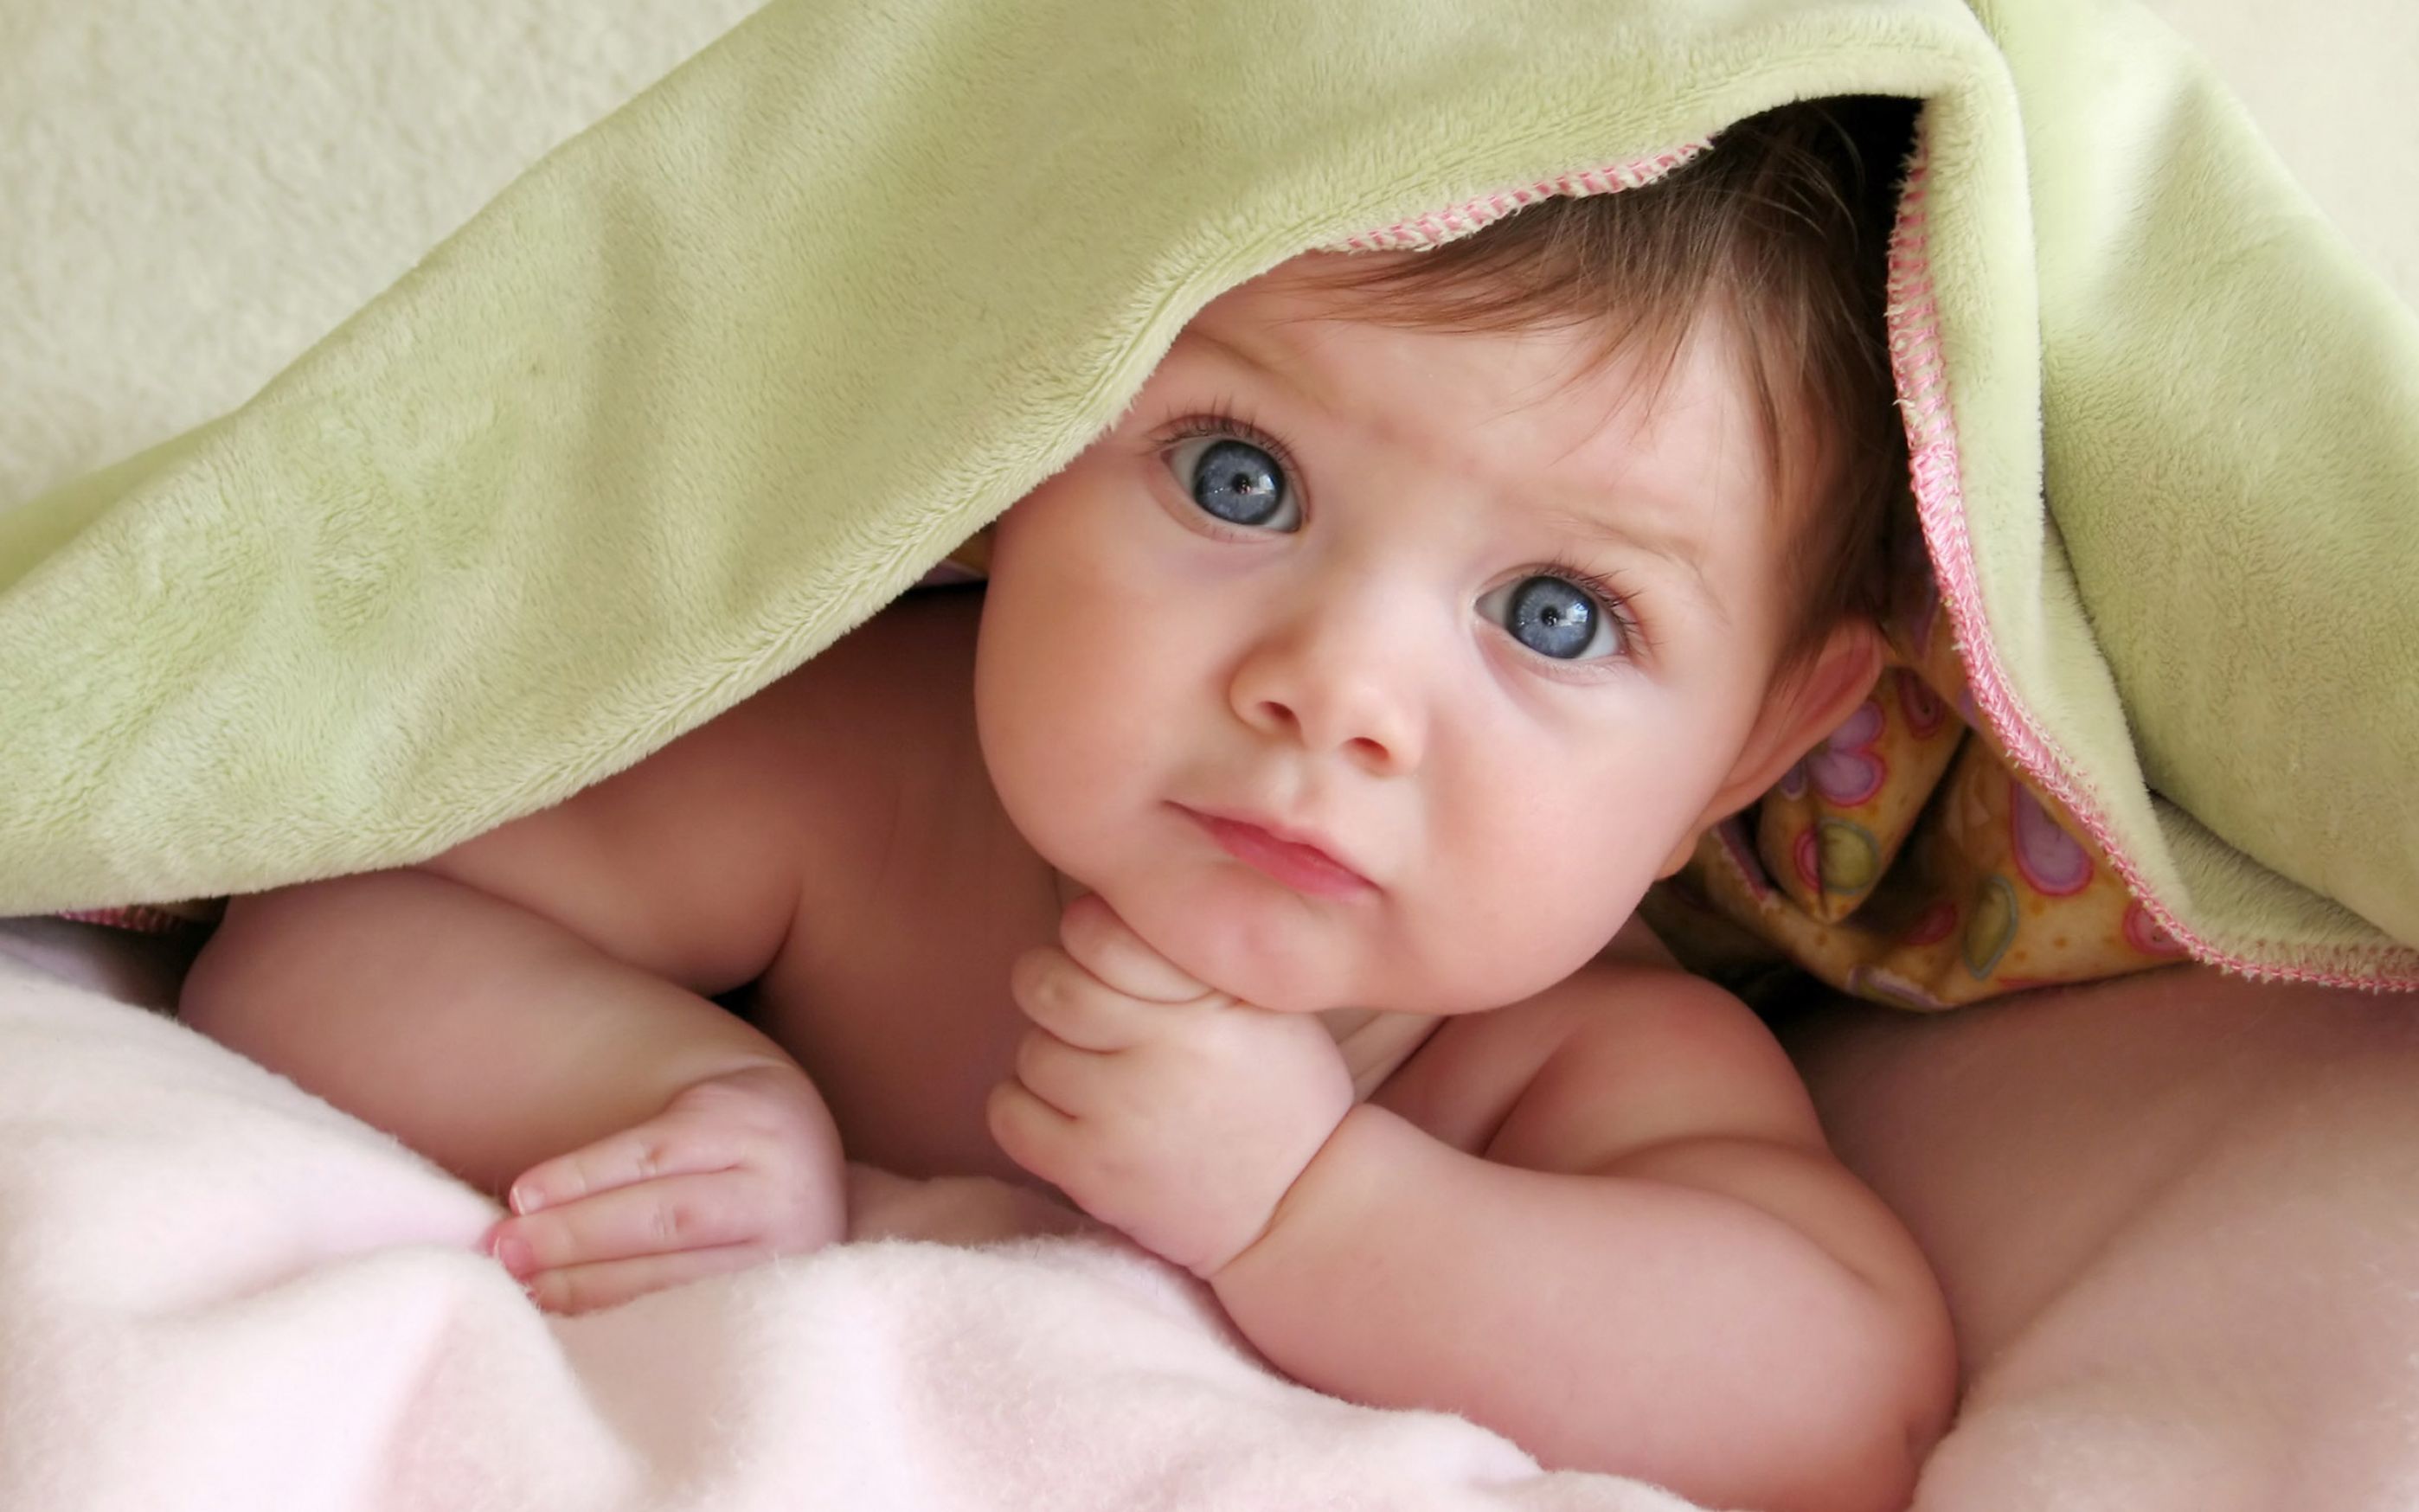 Very cute babies wallpapers pictures